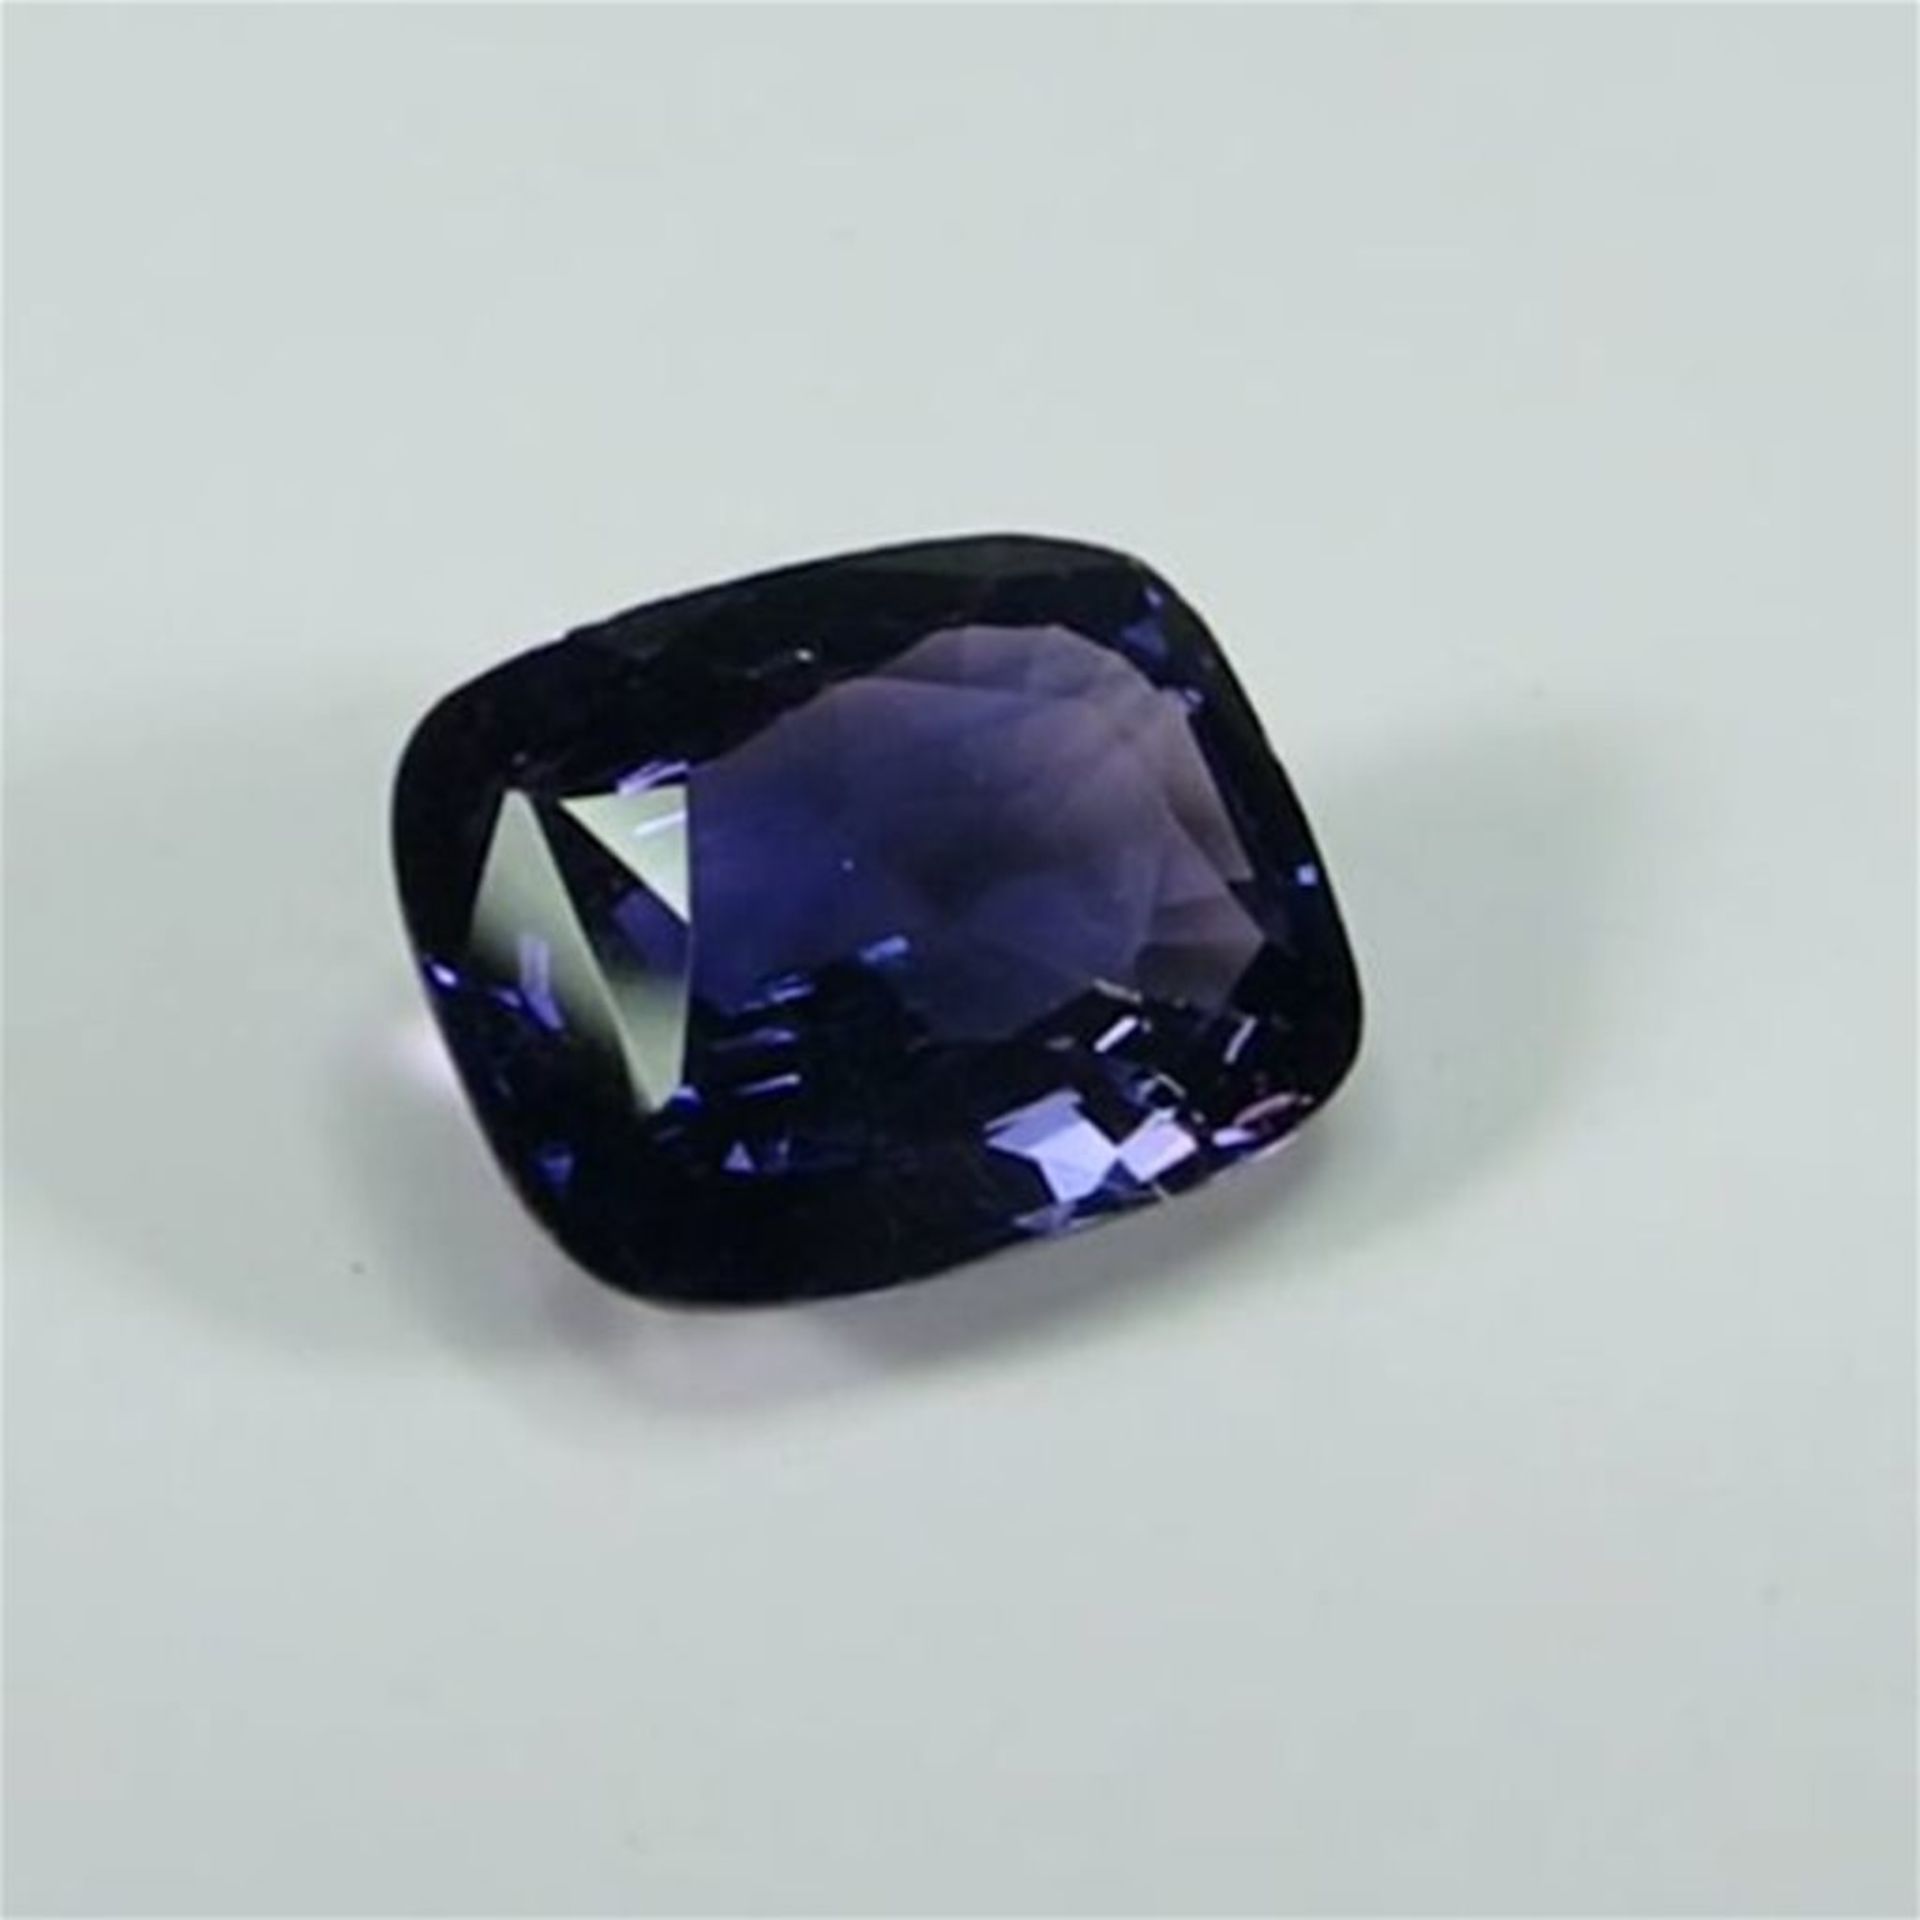 GIA Certified 2.90 ct. Bluish Violet Sapphire MADAGASCAR - Image 7 of 10